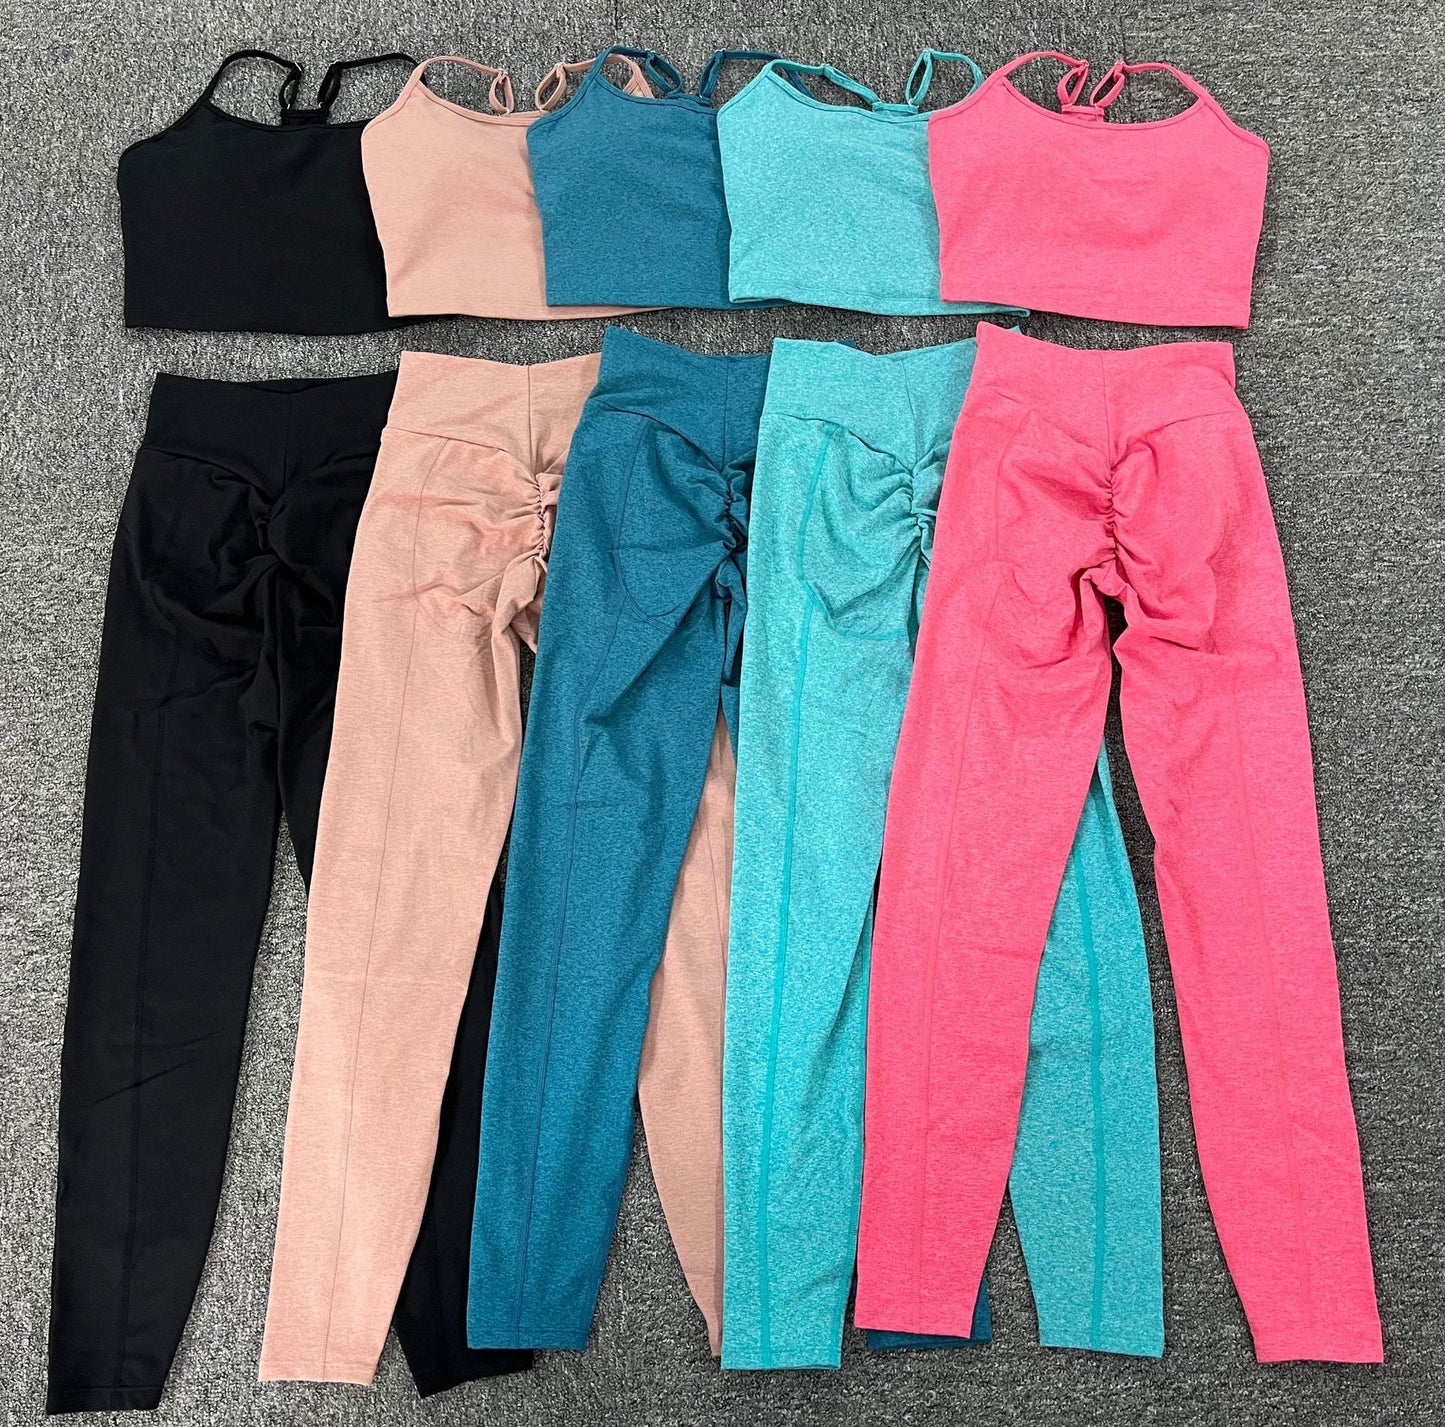 Sexy High Waist Yoga Suits for Women-Activewear-Free Shipping at meselling99